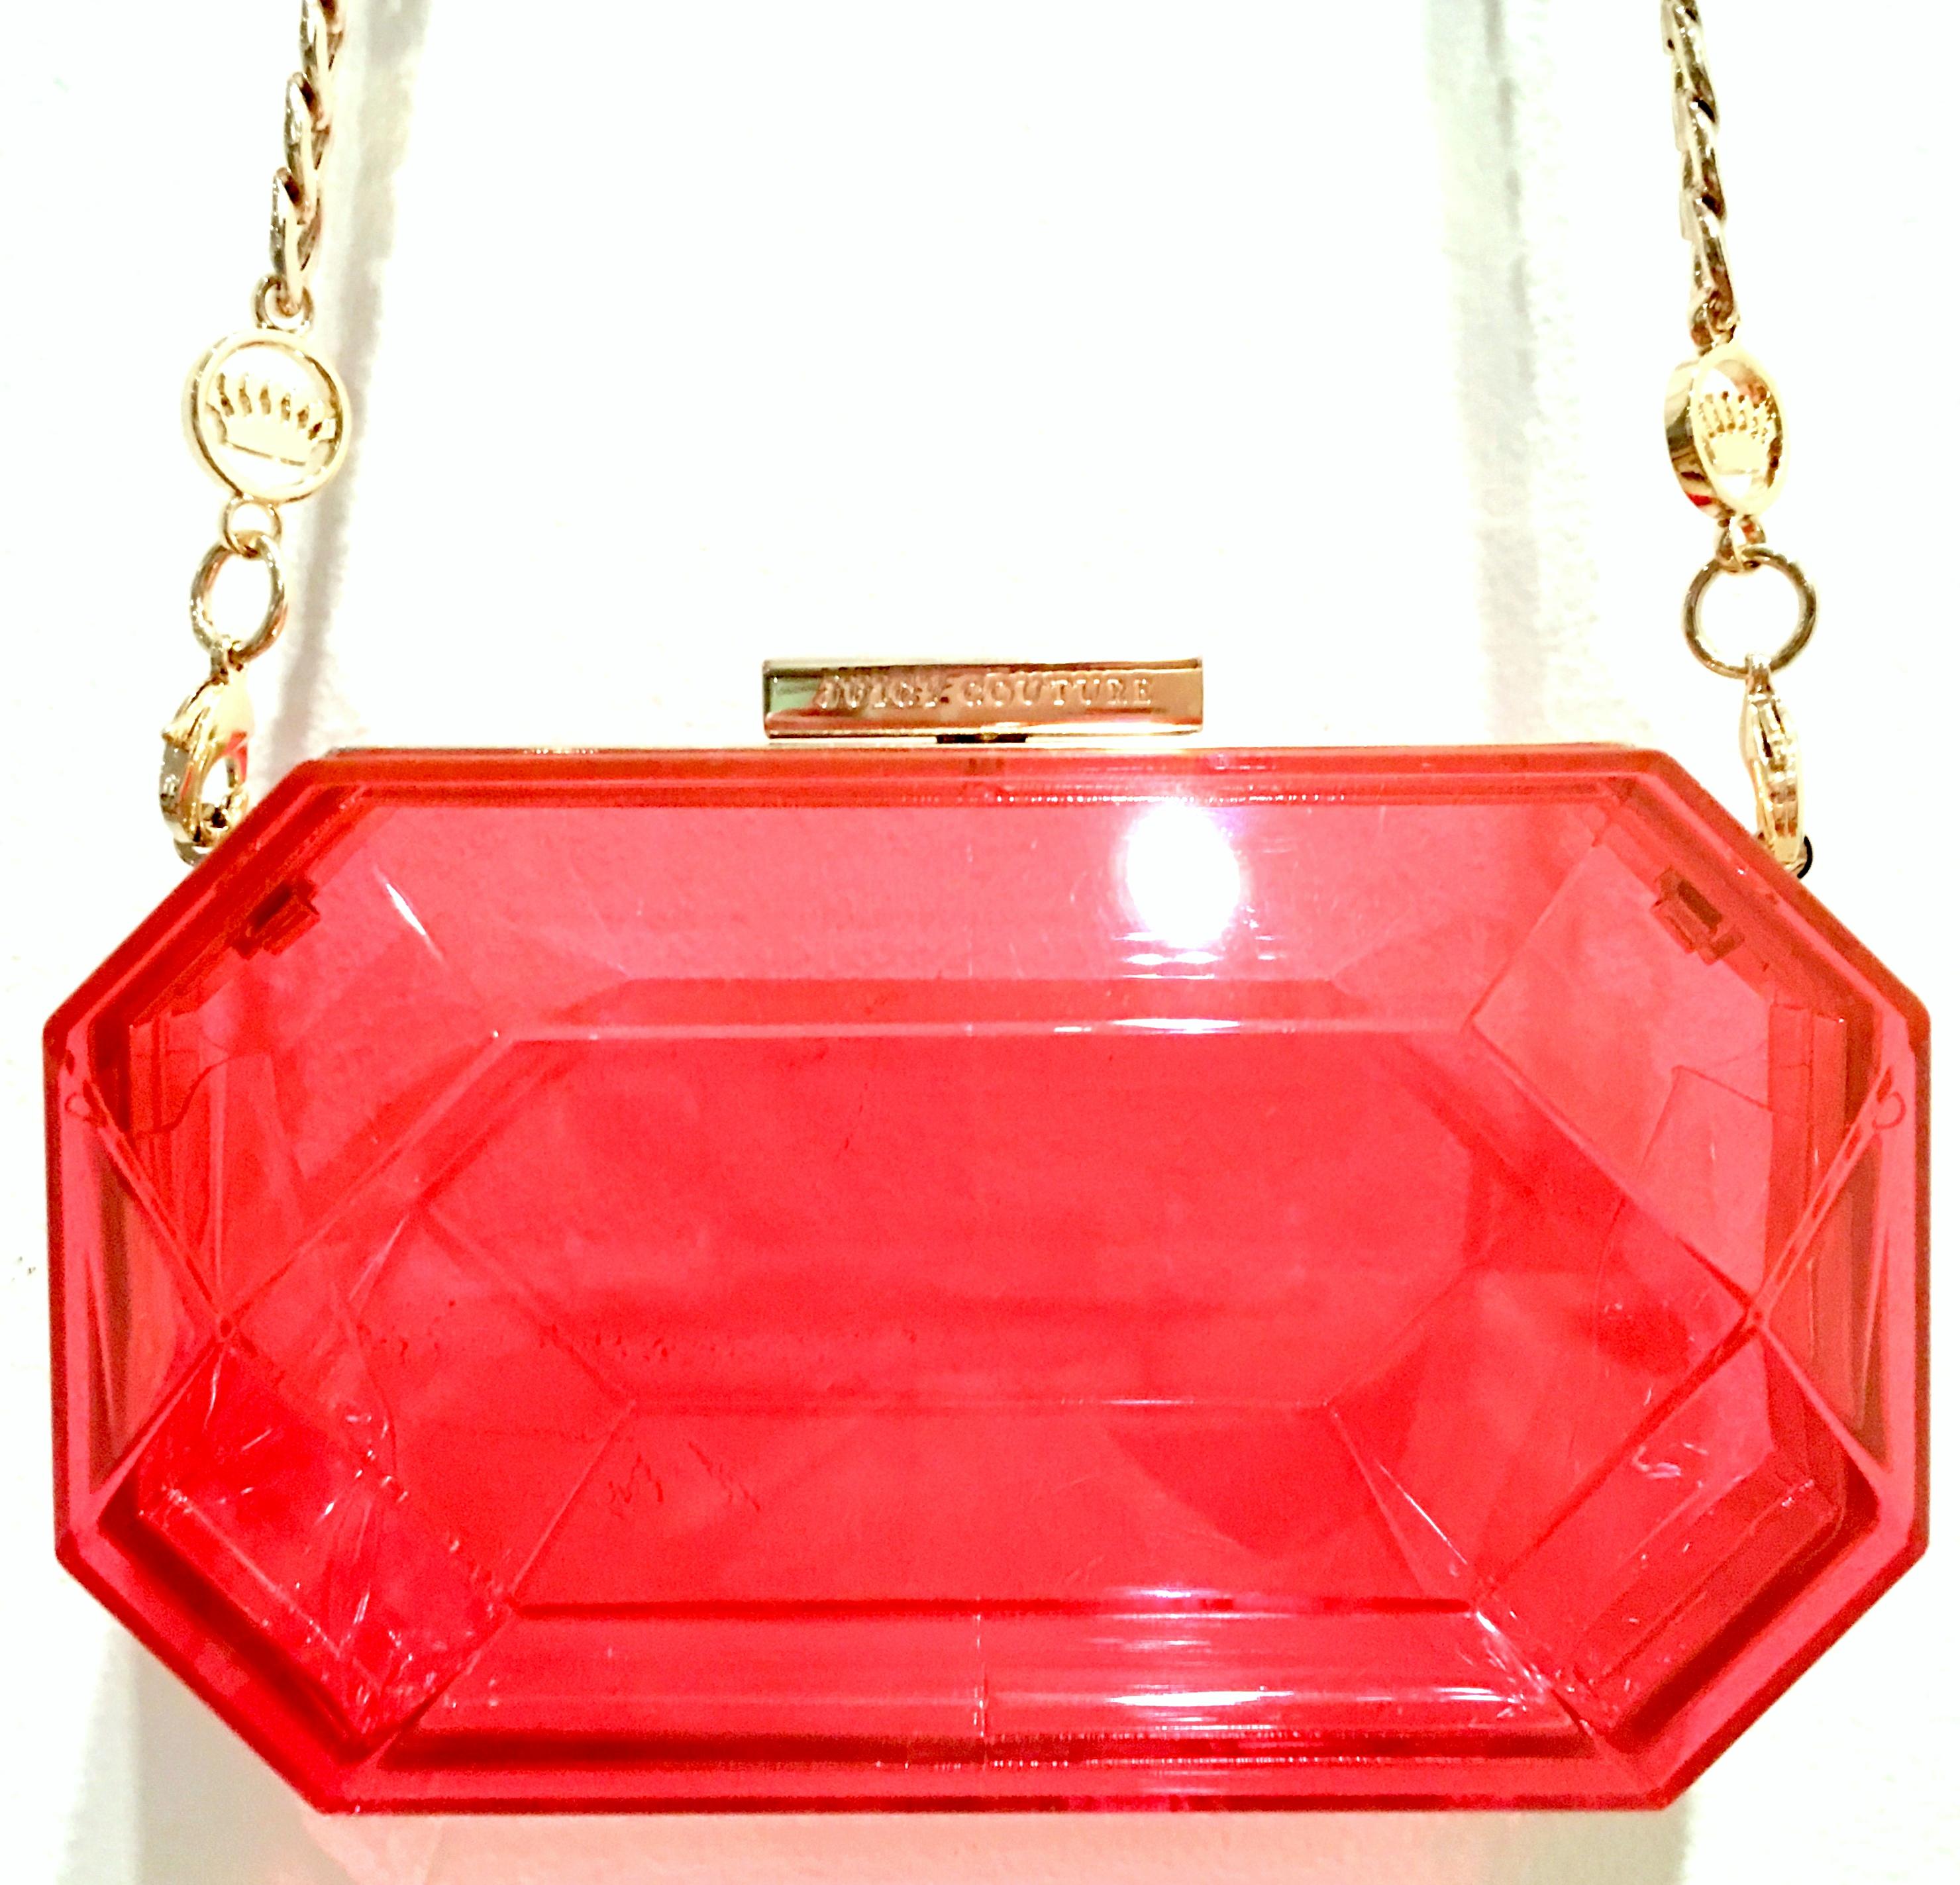 juicy couture bags